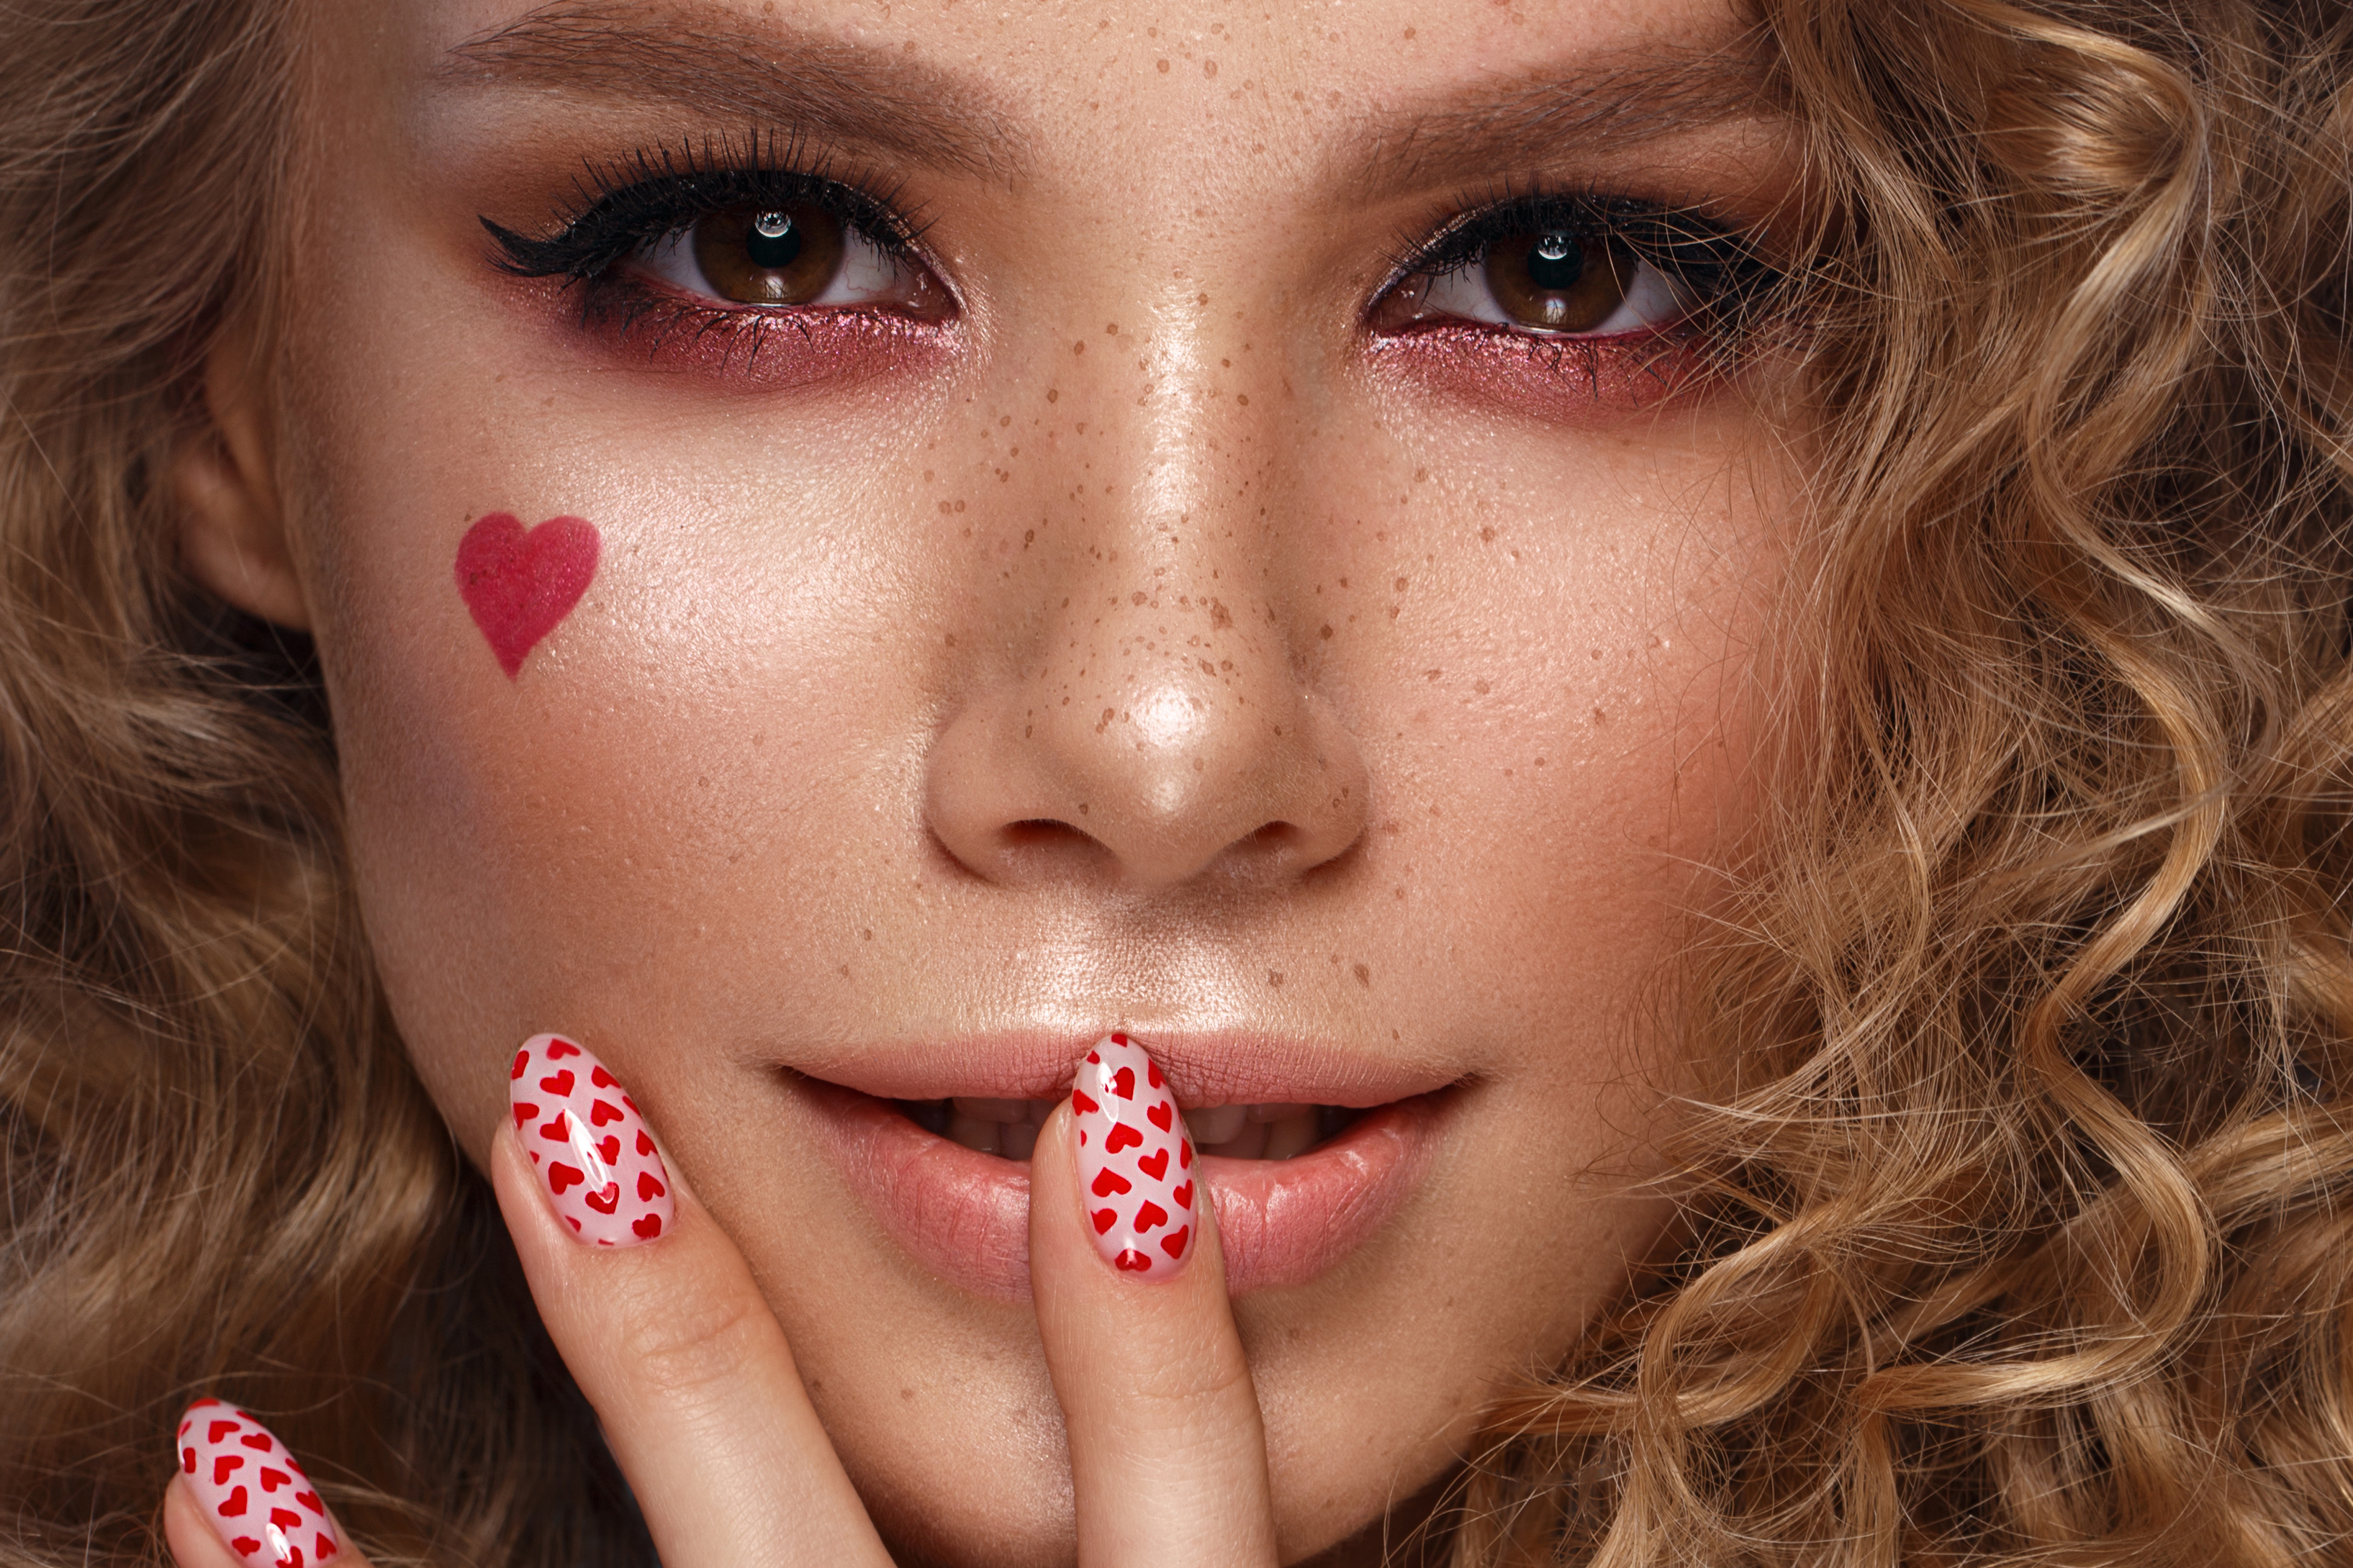 Women Face Closeup Tattoo Makeup Curls Hearts Model Looking At Viewer Portrait Lips Eyes Freckles Na 3269x2179